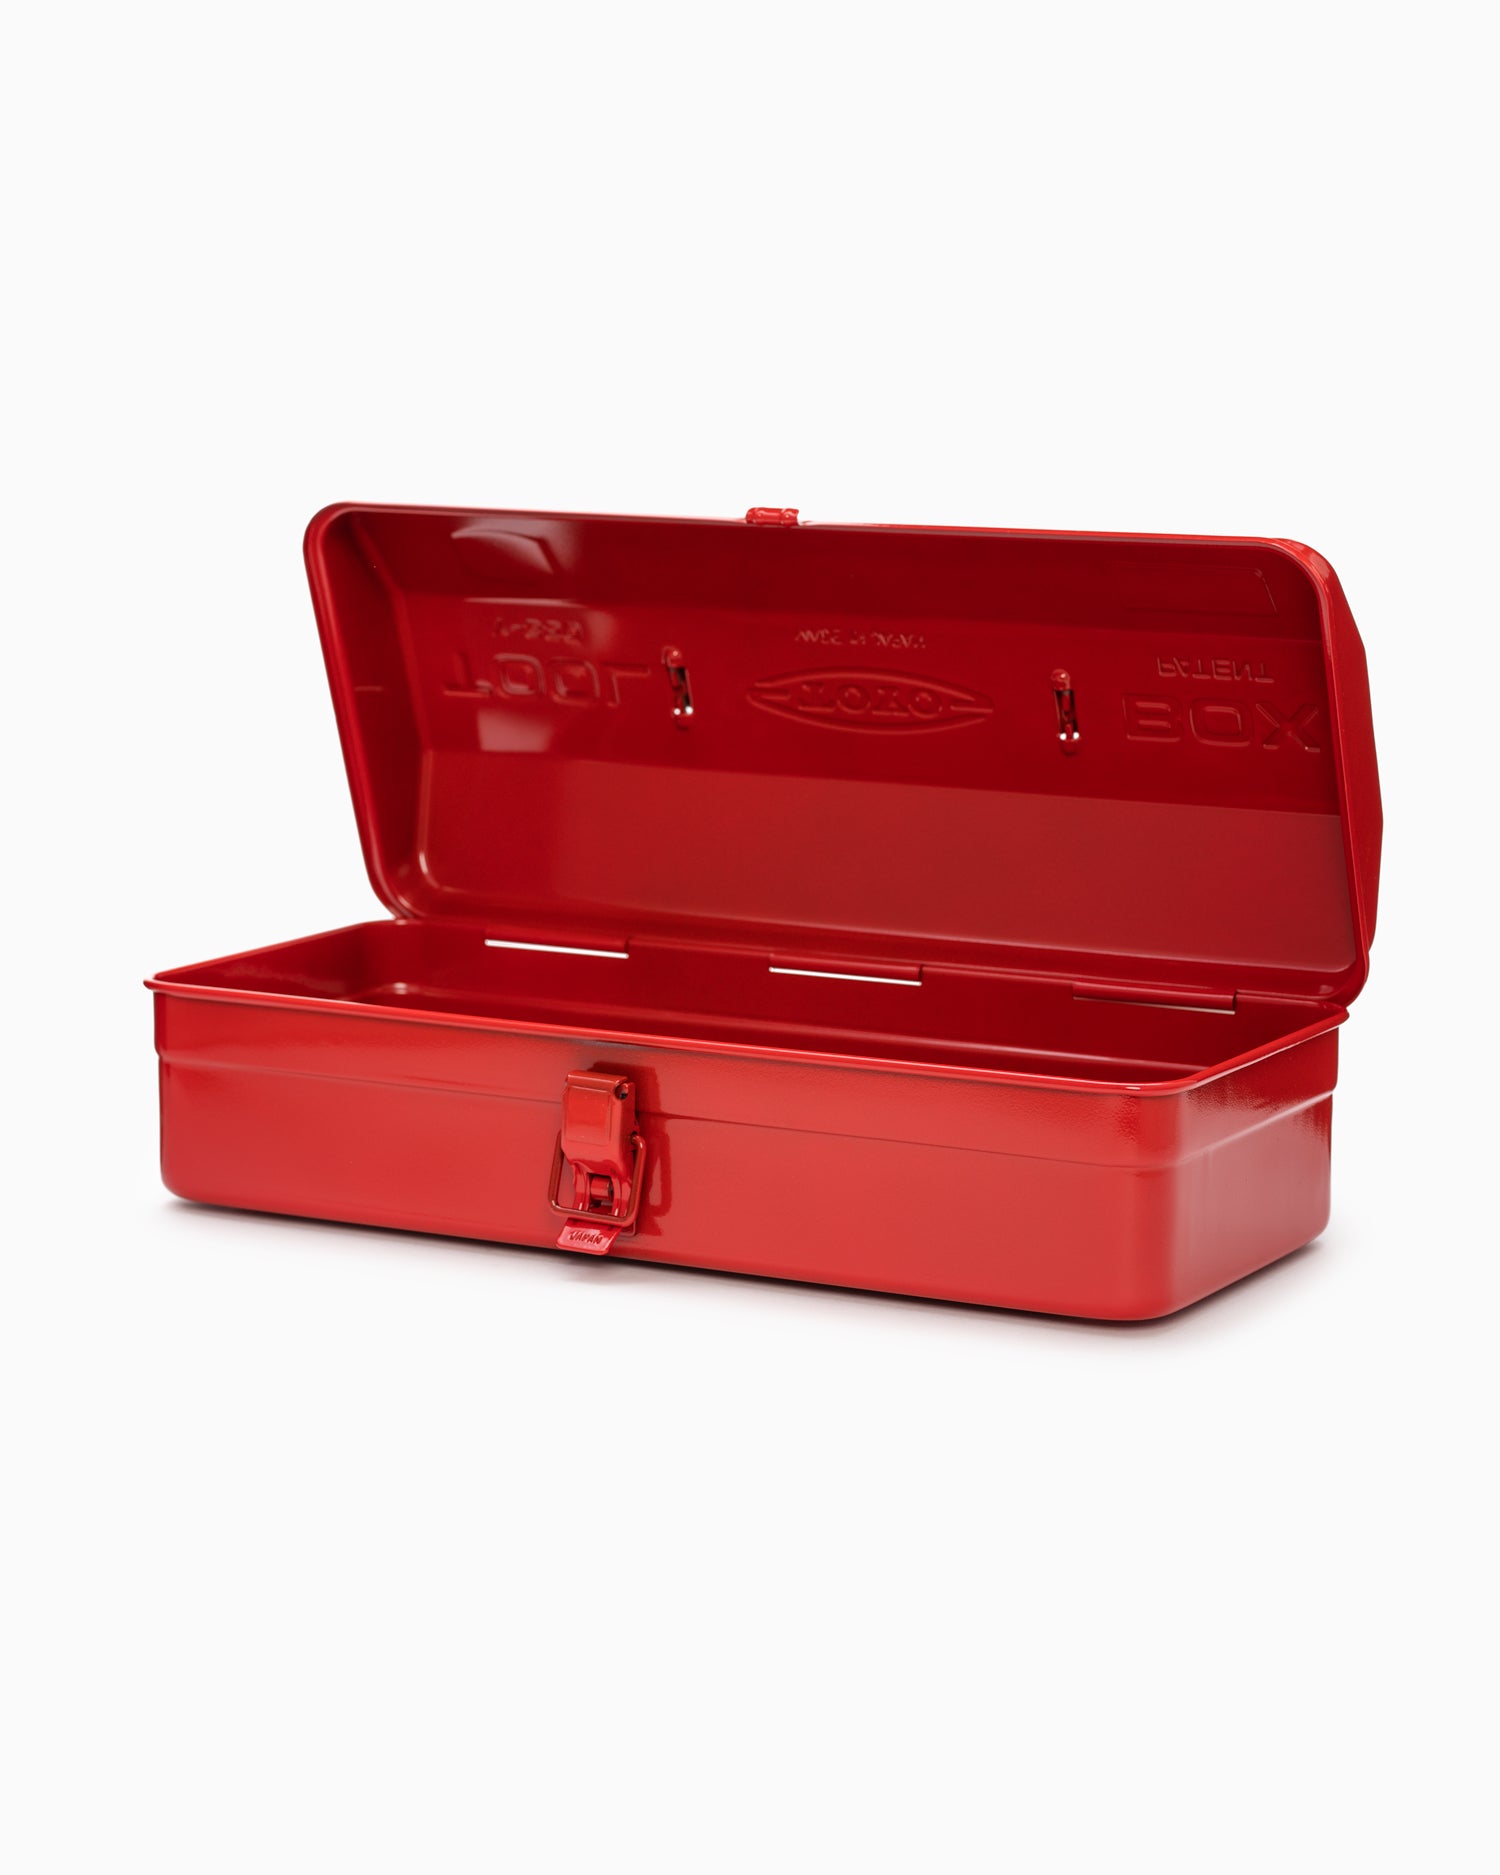 TOYO STEEL - Camber-top Toolbox Y-350 R (Red) – KOHEZI